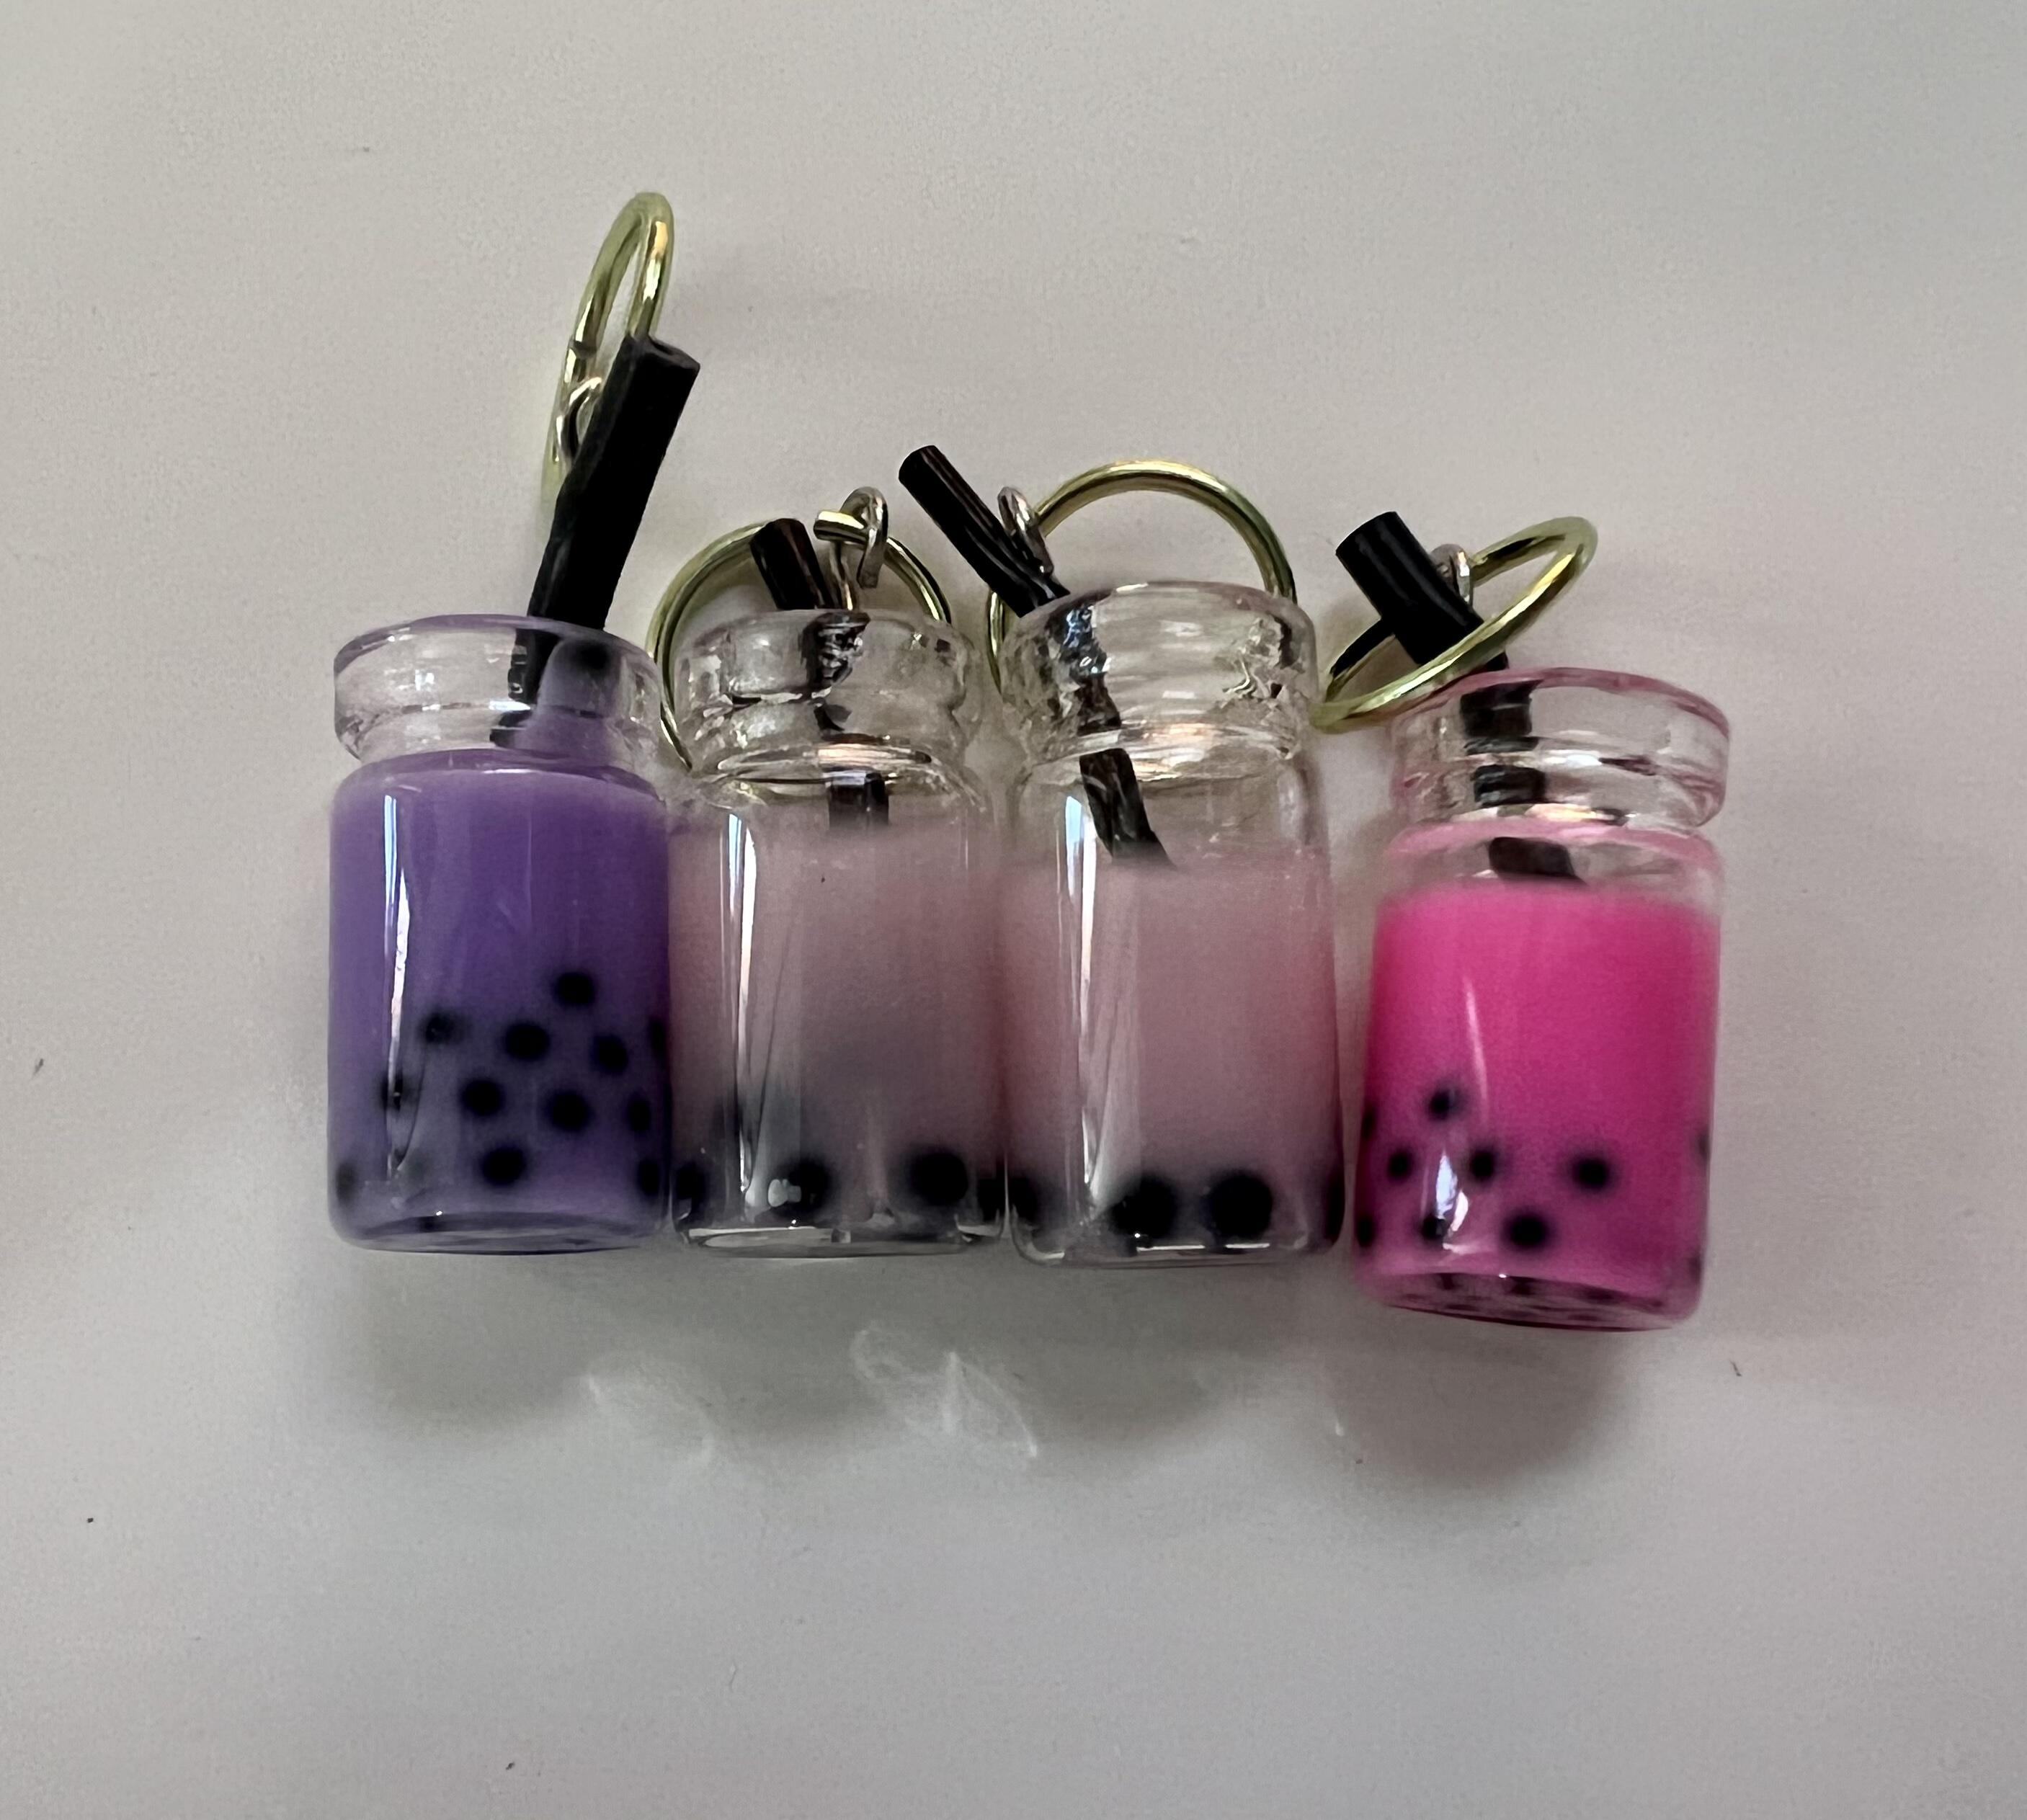 Bubble tea stitch markers in variety of colors